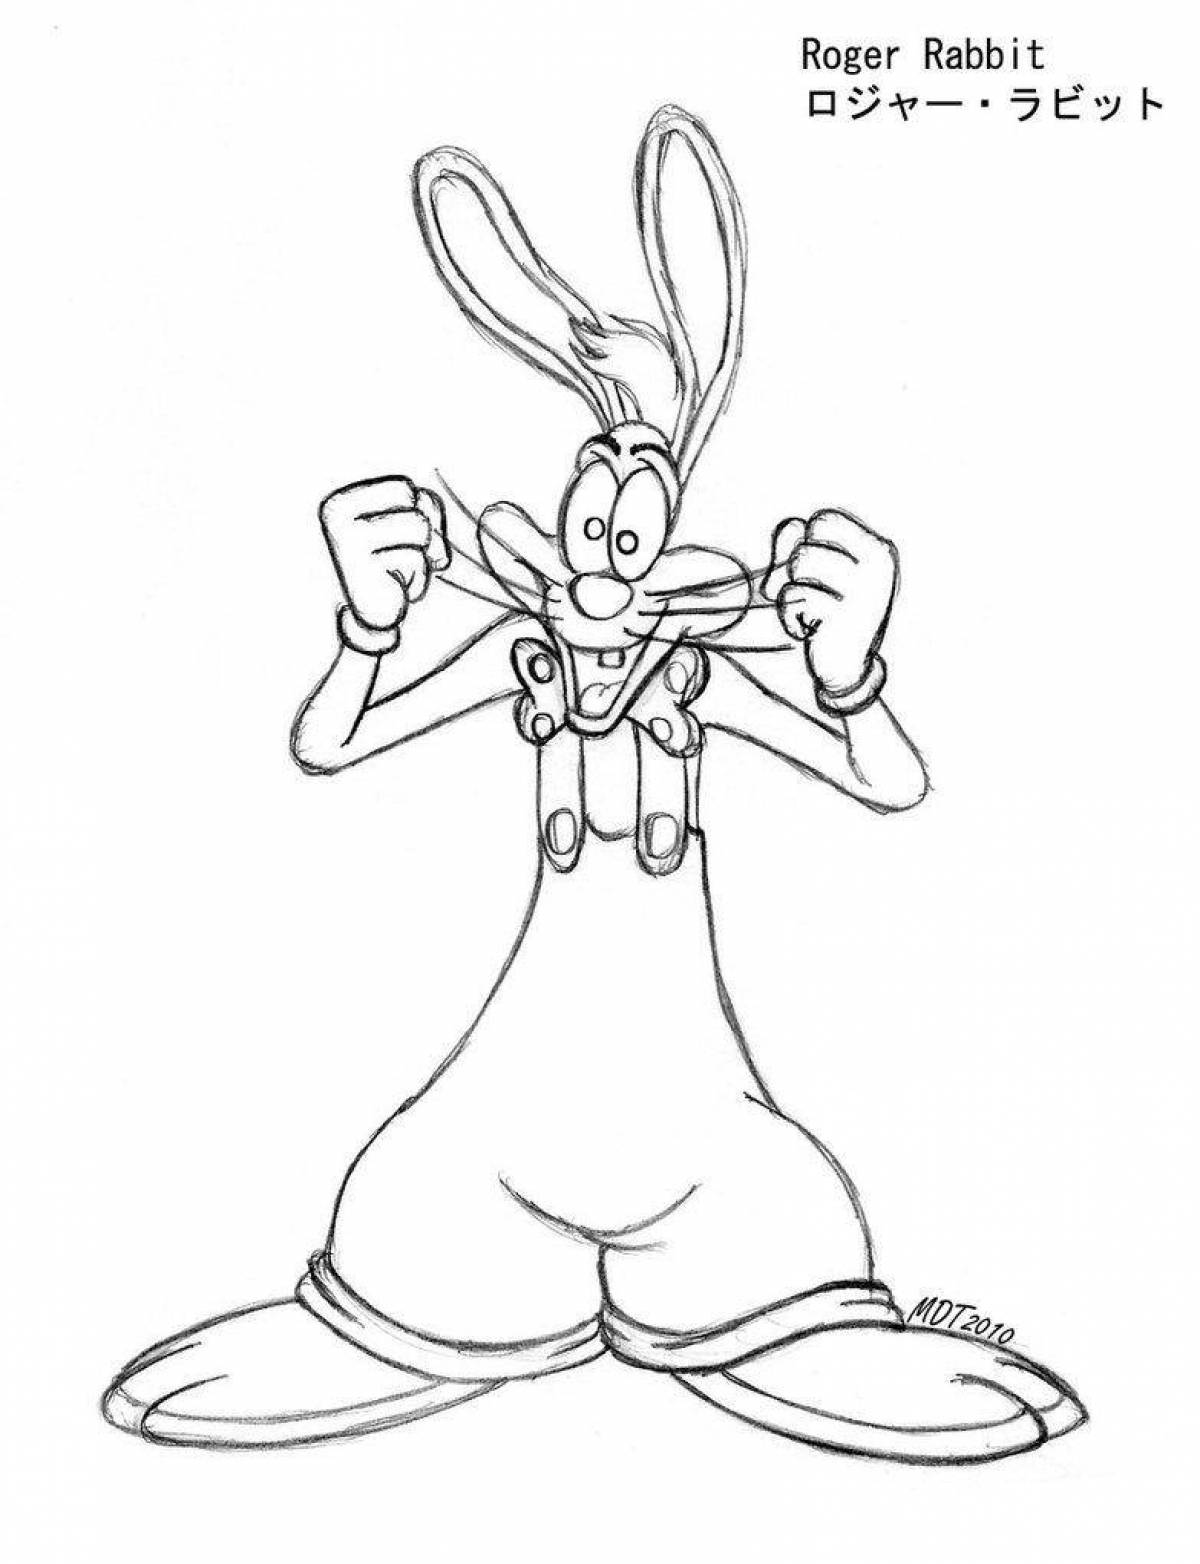 Great roger rabbit coloring book